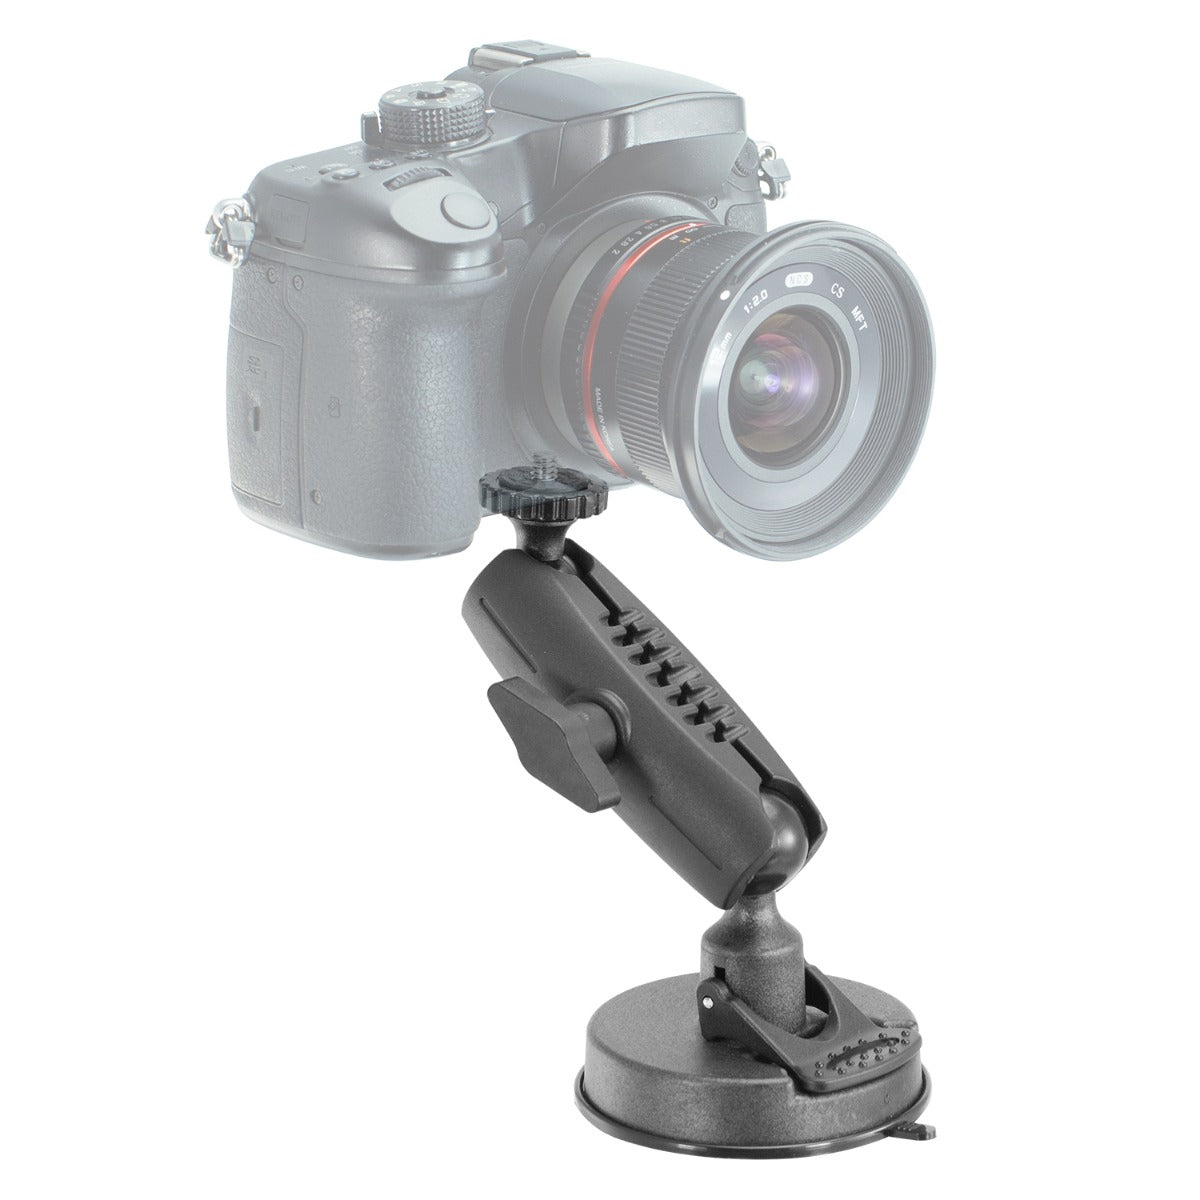 iBOLT ¼” 20 Camera Screw Bizmount™ Suction Cup Mount - for Industry Standard ¼” 20 Accessories